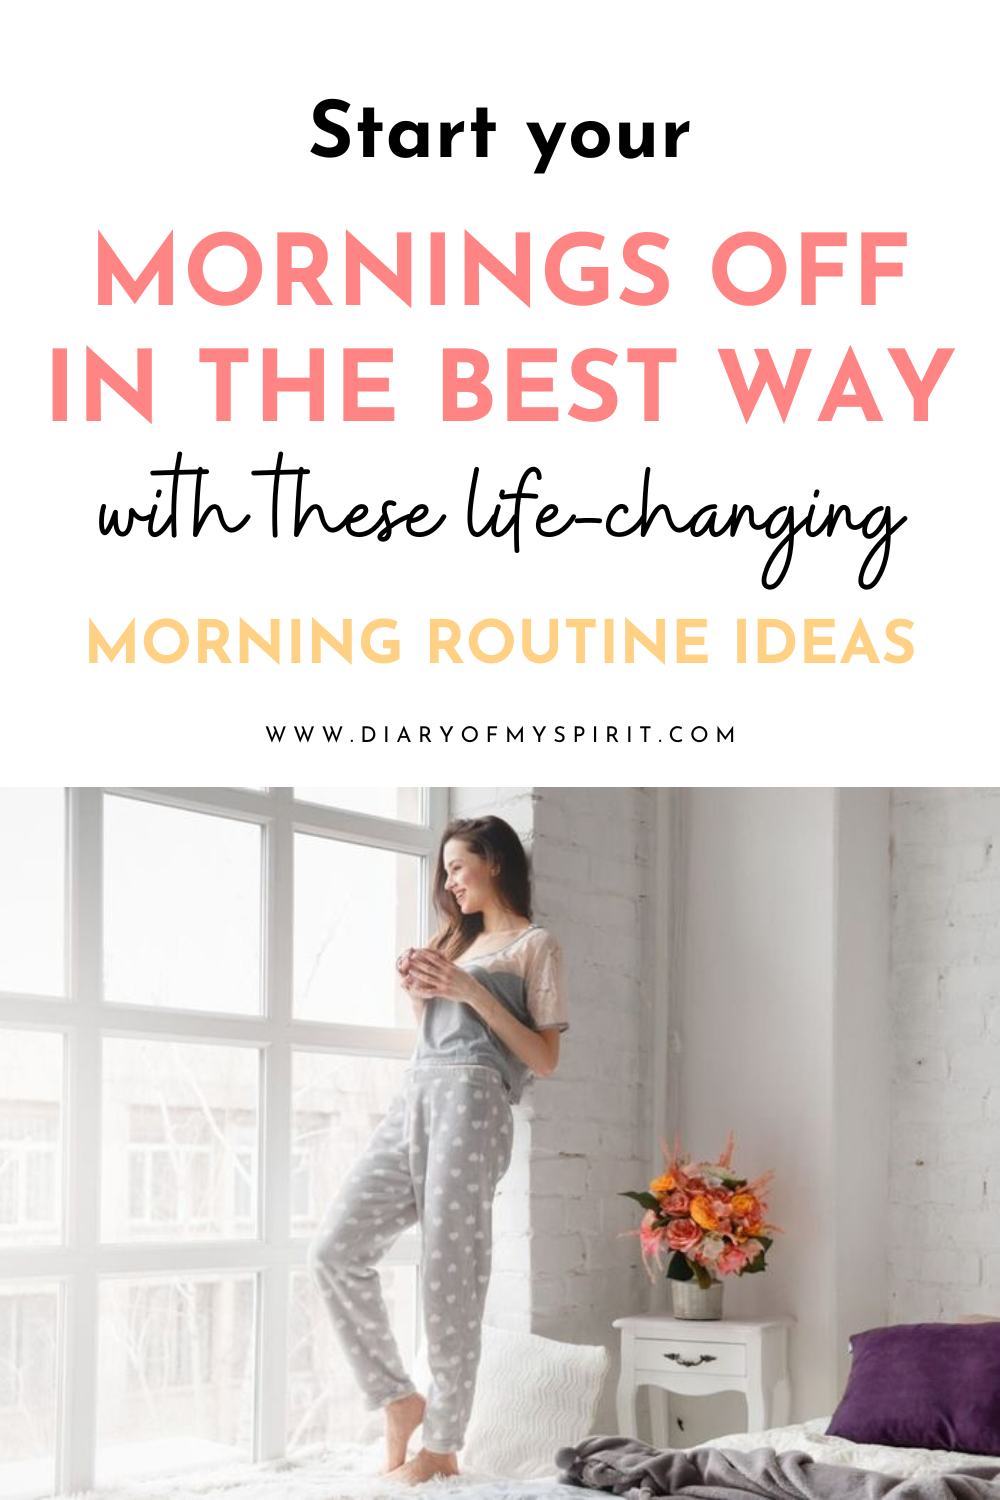 morning routine. morning routine ideas. good morning routine ideas. morning rituals. morning routines. best morning routine. how to spend your morning. healthy morning routine. mindful morning routine. productive morning routine. how to wake up feeling good. how to energise in the morning.